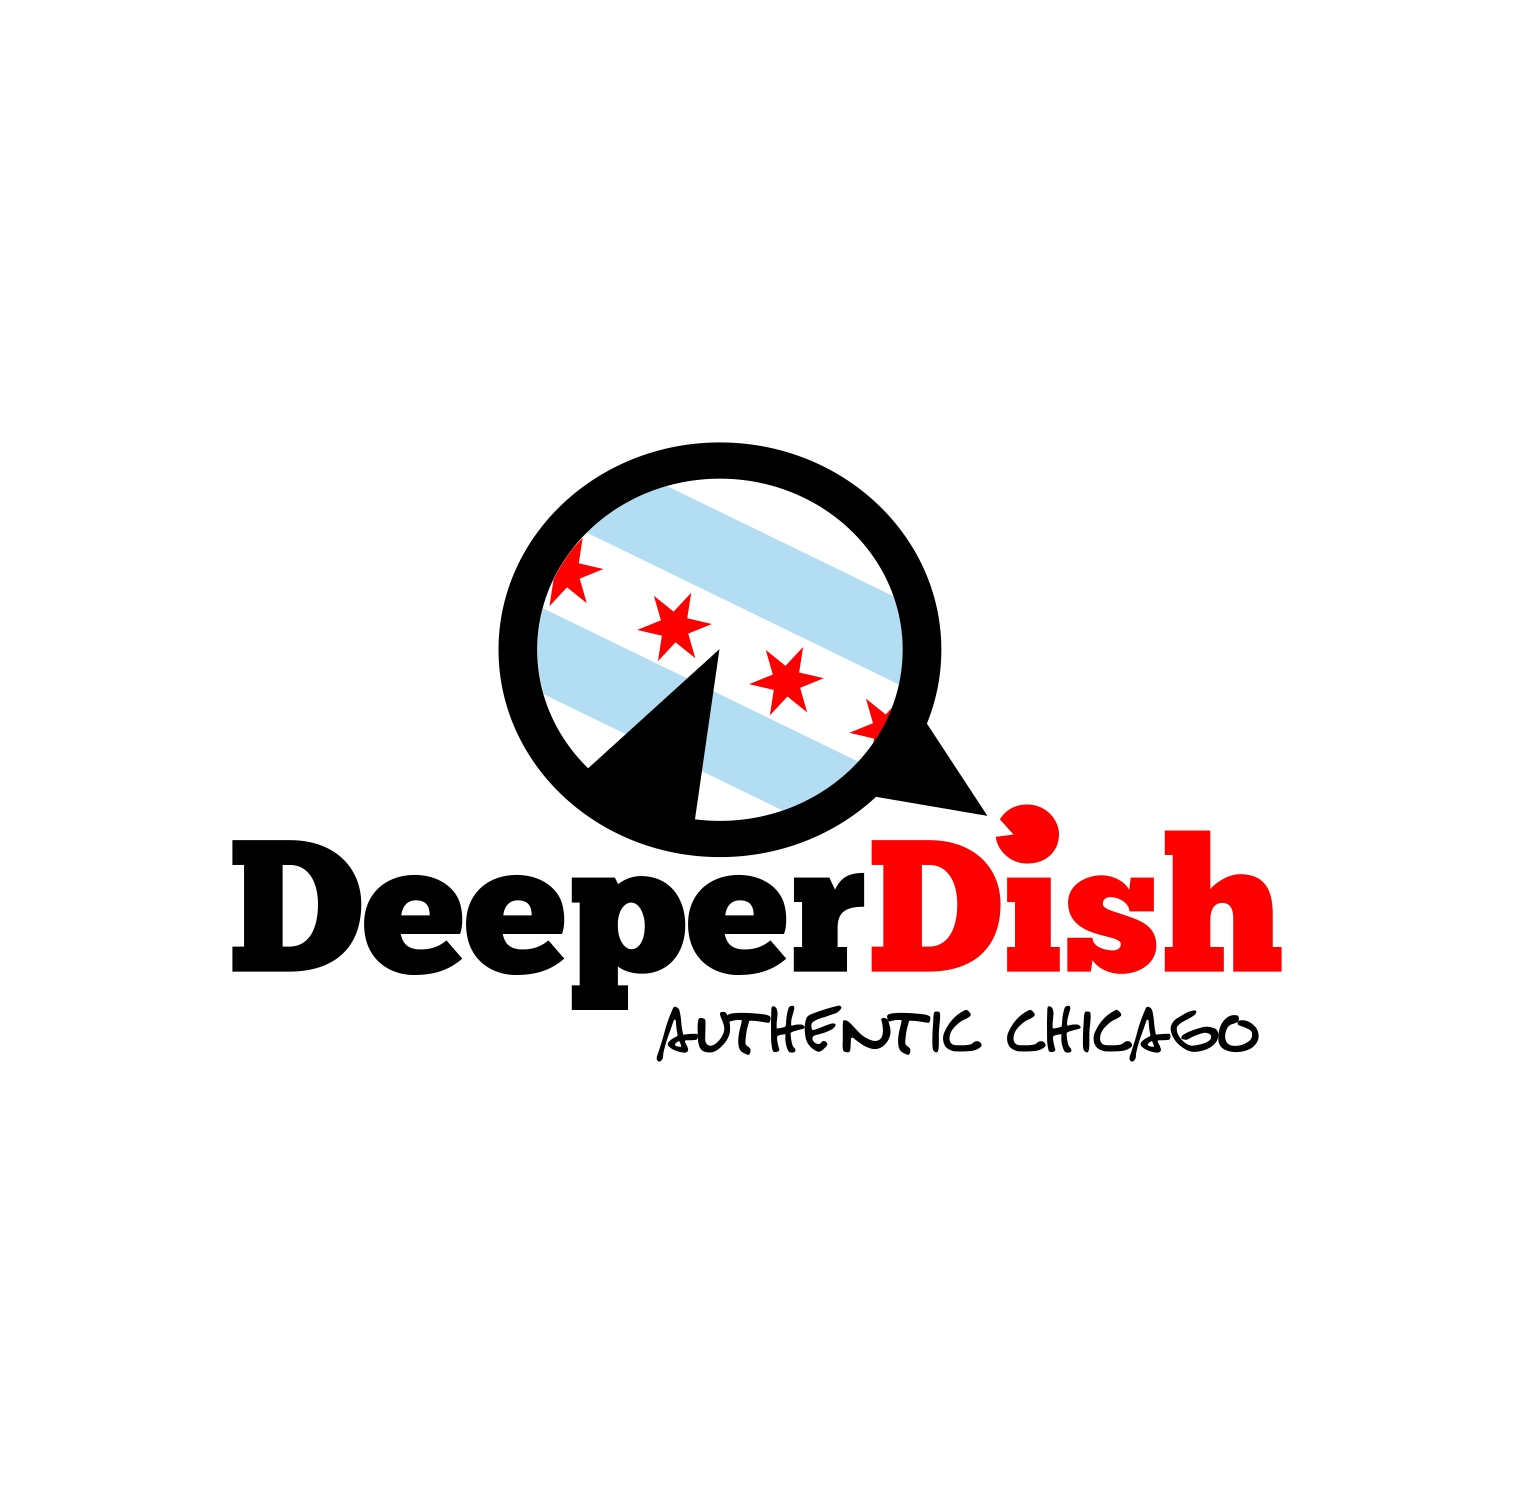 Deeper Dish - Authentic Chicago